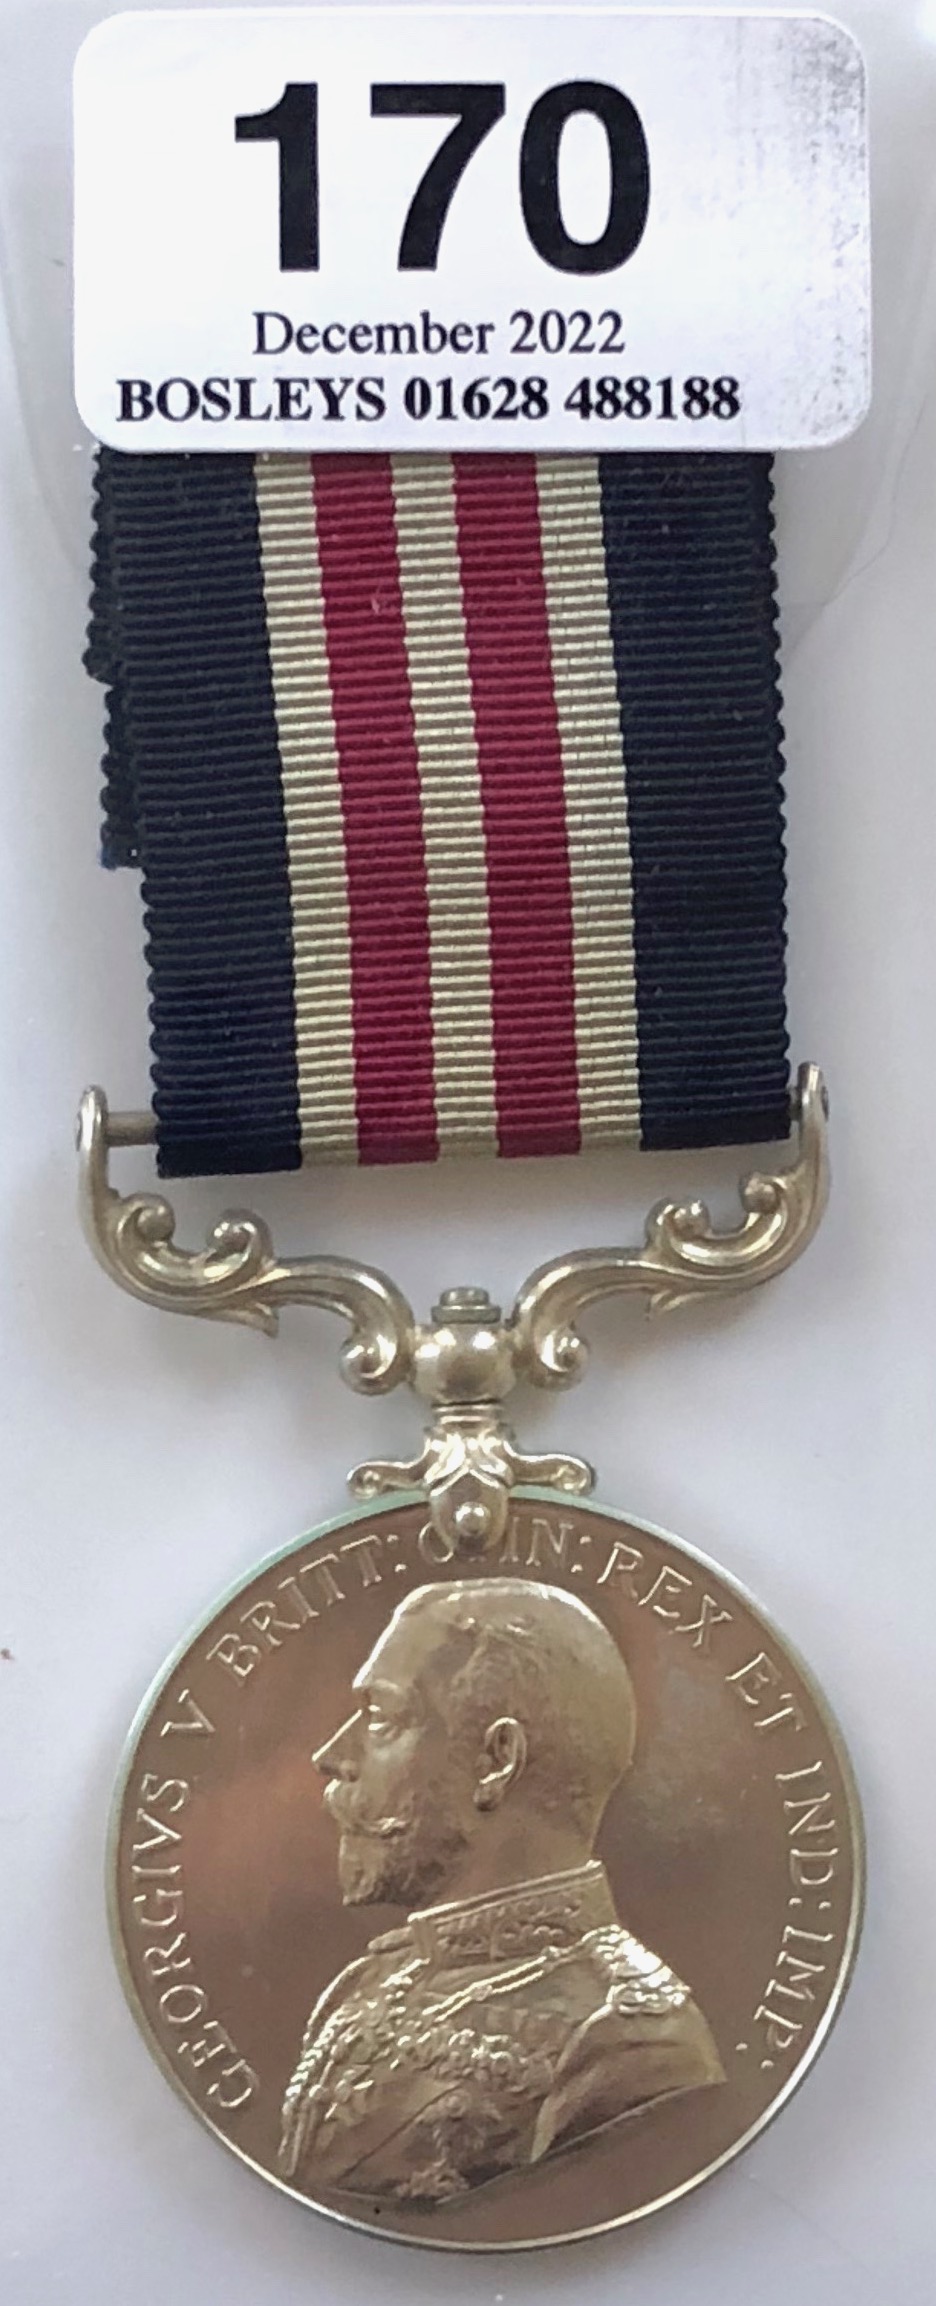 WW1 1918 89th (Scottish 1st Highland) Field Ambulance RAMC POW Military Medal. Awarded to 301452 PTE